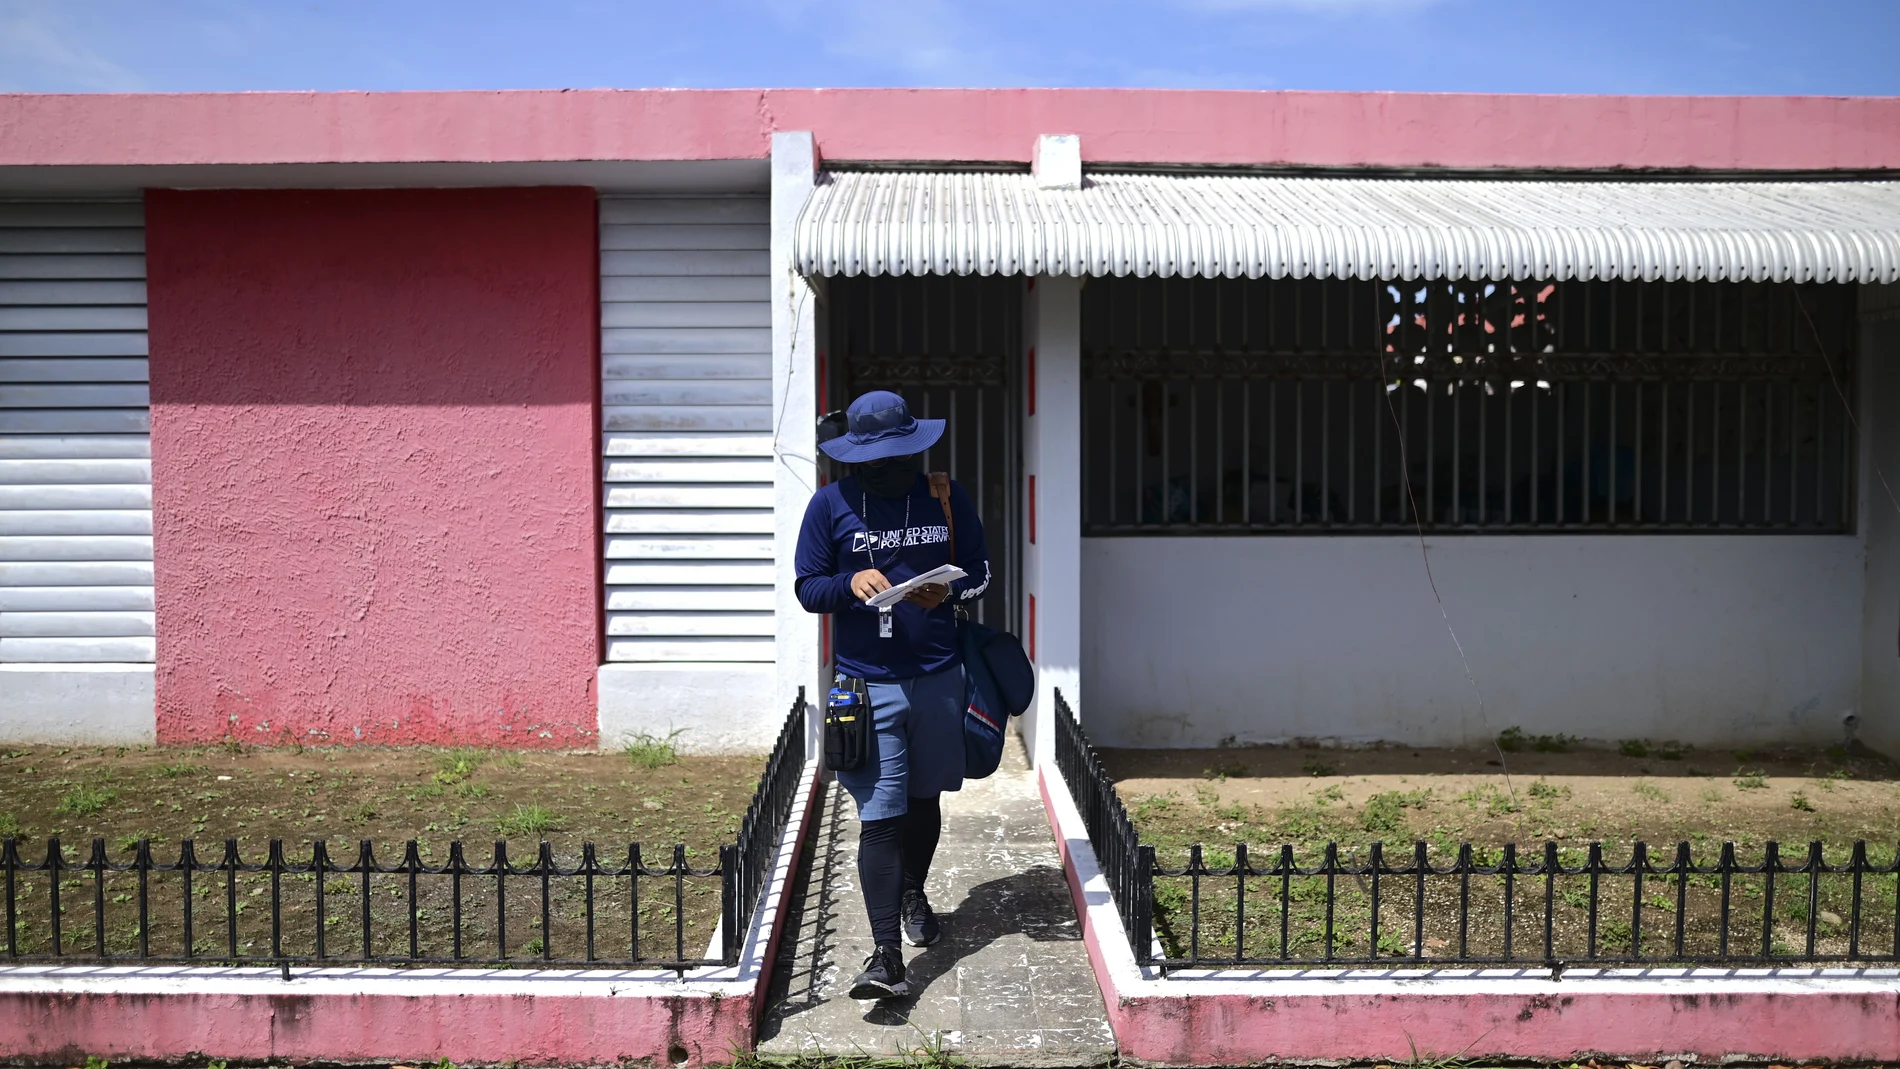 Postal worker Jose Montoya does his rounds in Carolina, Puerto Rico, Thursday, Oct. 1, 2020. More than half of all homes in Puerto Rico lack a physical address, so the absence of street names and numbers also have created multiple problems ranging from ambulances unable to reach a home in time to a delay in the distribution of aid after Hurricane Maria and a string of recent earthquakes. (AP Photo/Carlos Giusti)